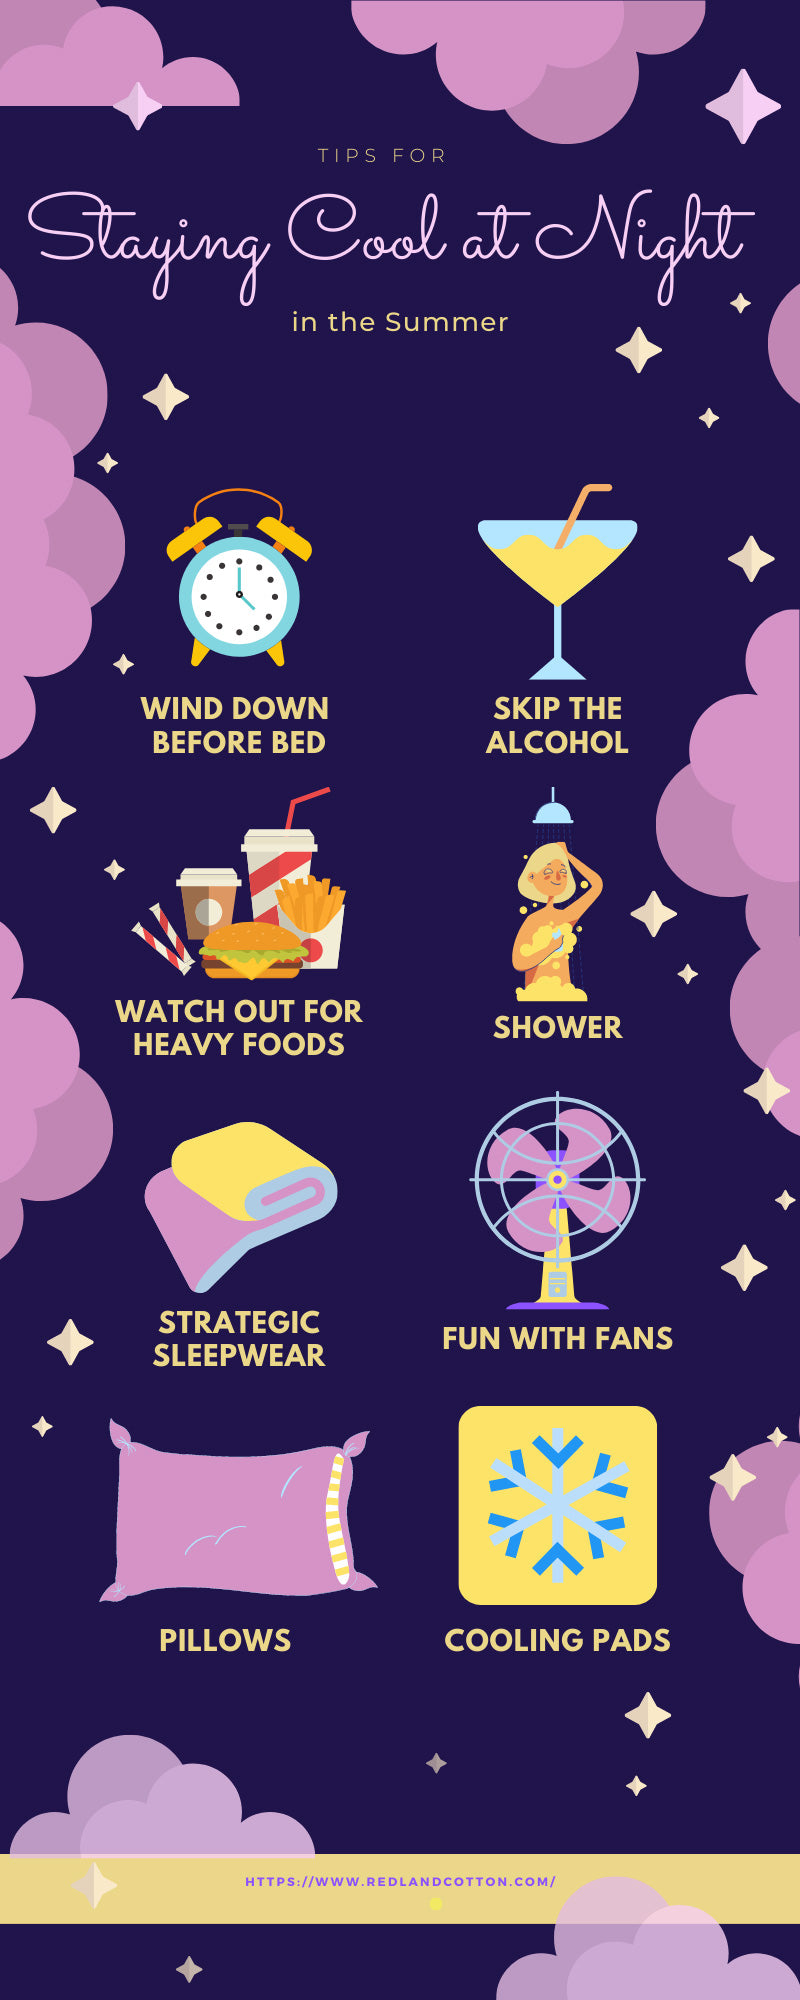 Tips for Staying Cool at Night in the Summer